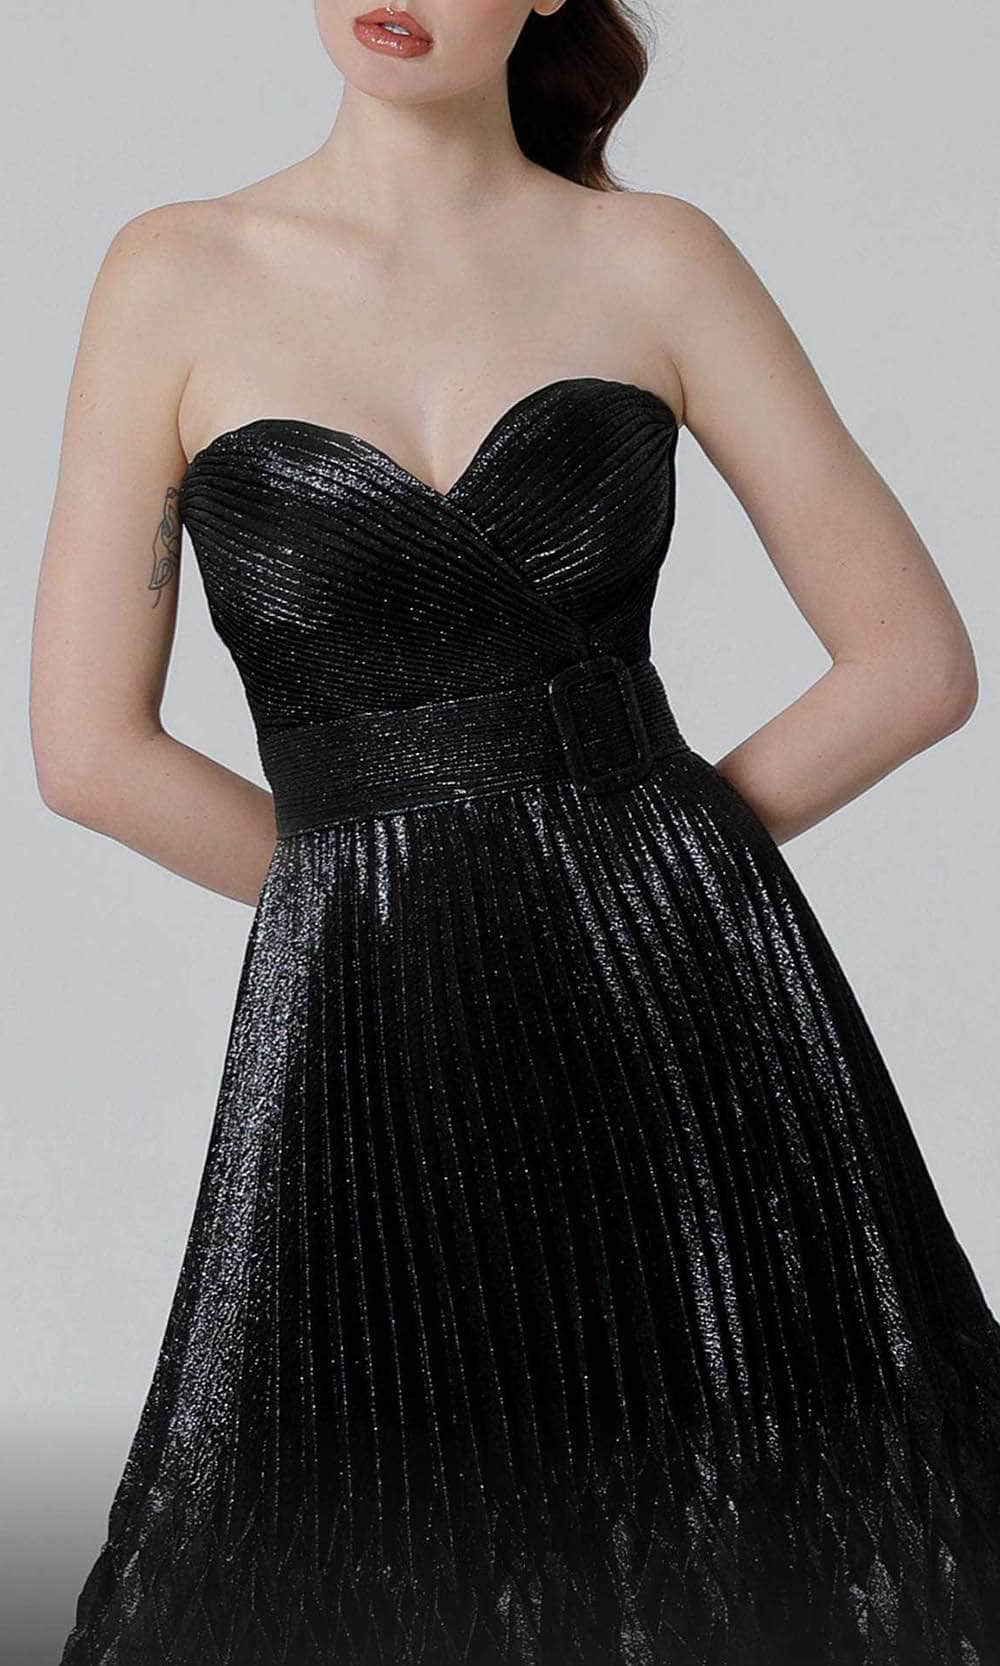 MNM COUTURE N0462 - Strapless Origami Style Evening Dress Evening Dresses